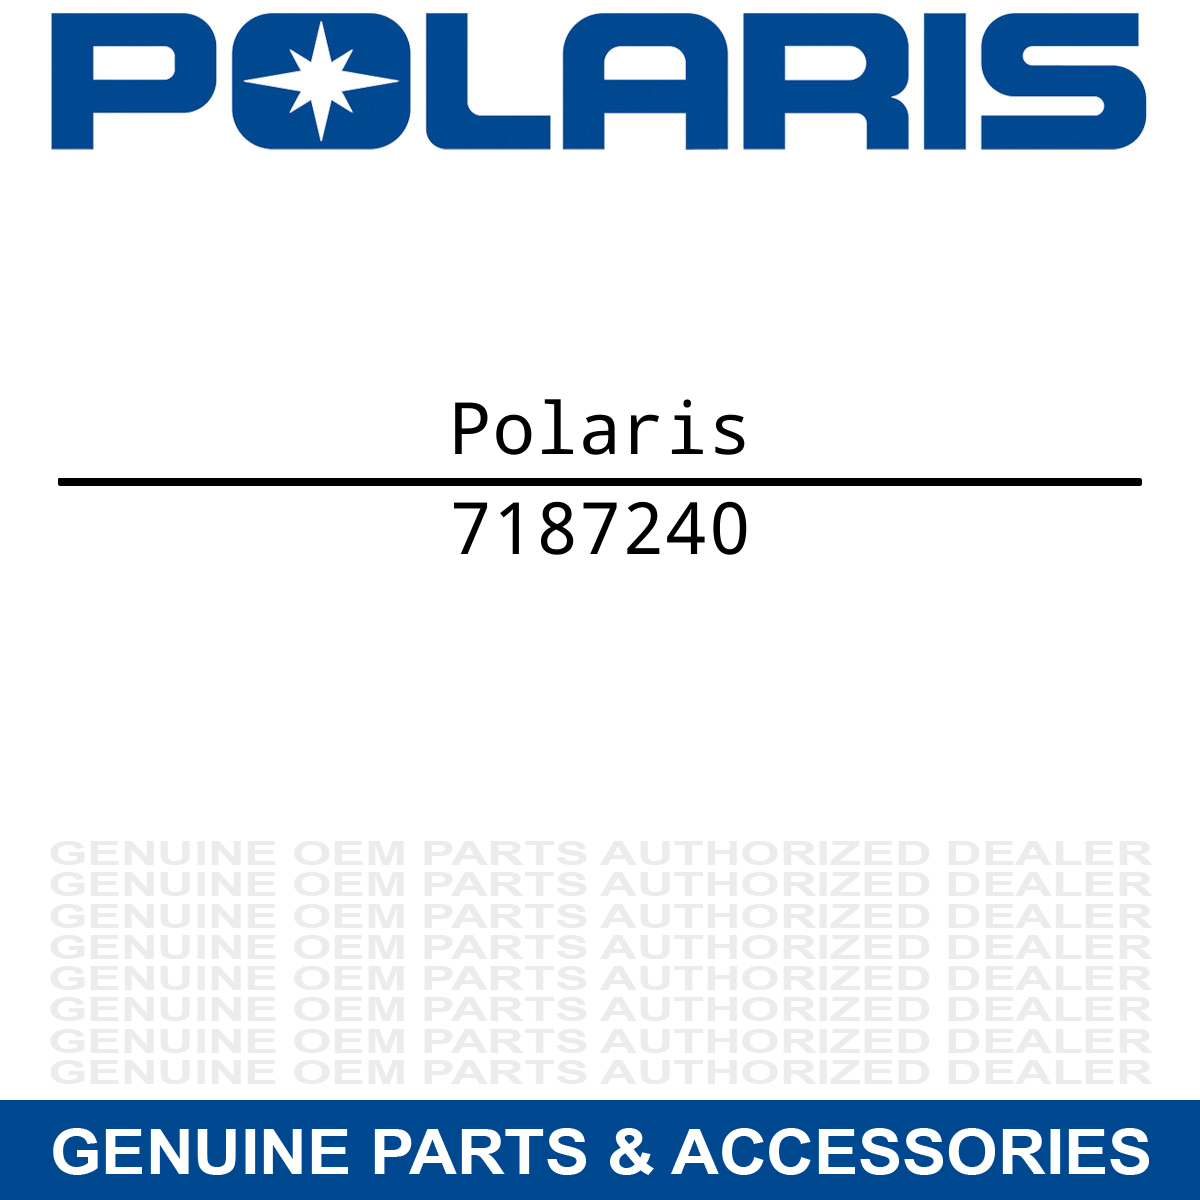 Polaris 7187240 Left Hand "137 LE" Tunnel Side Decal